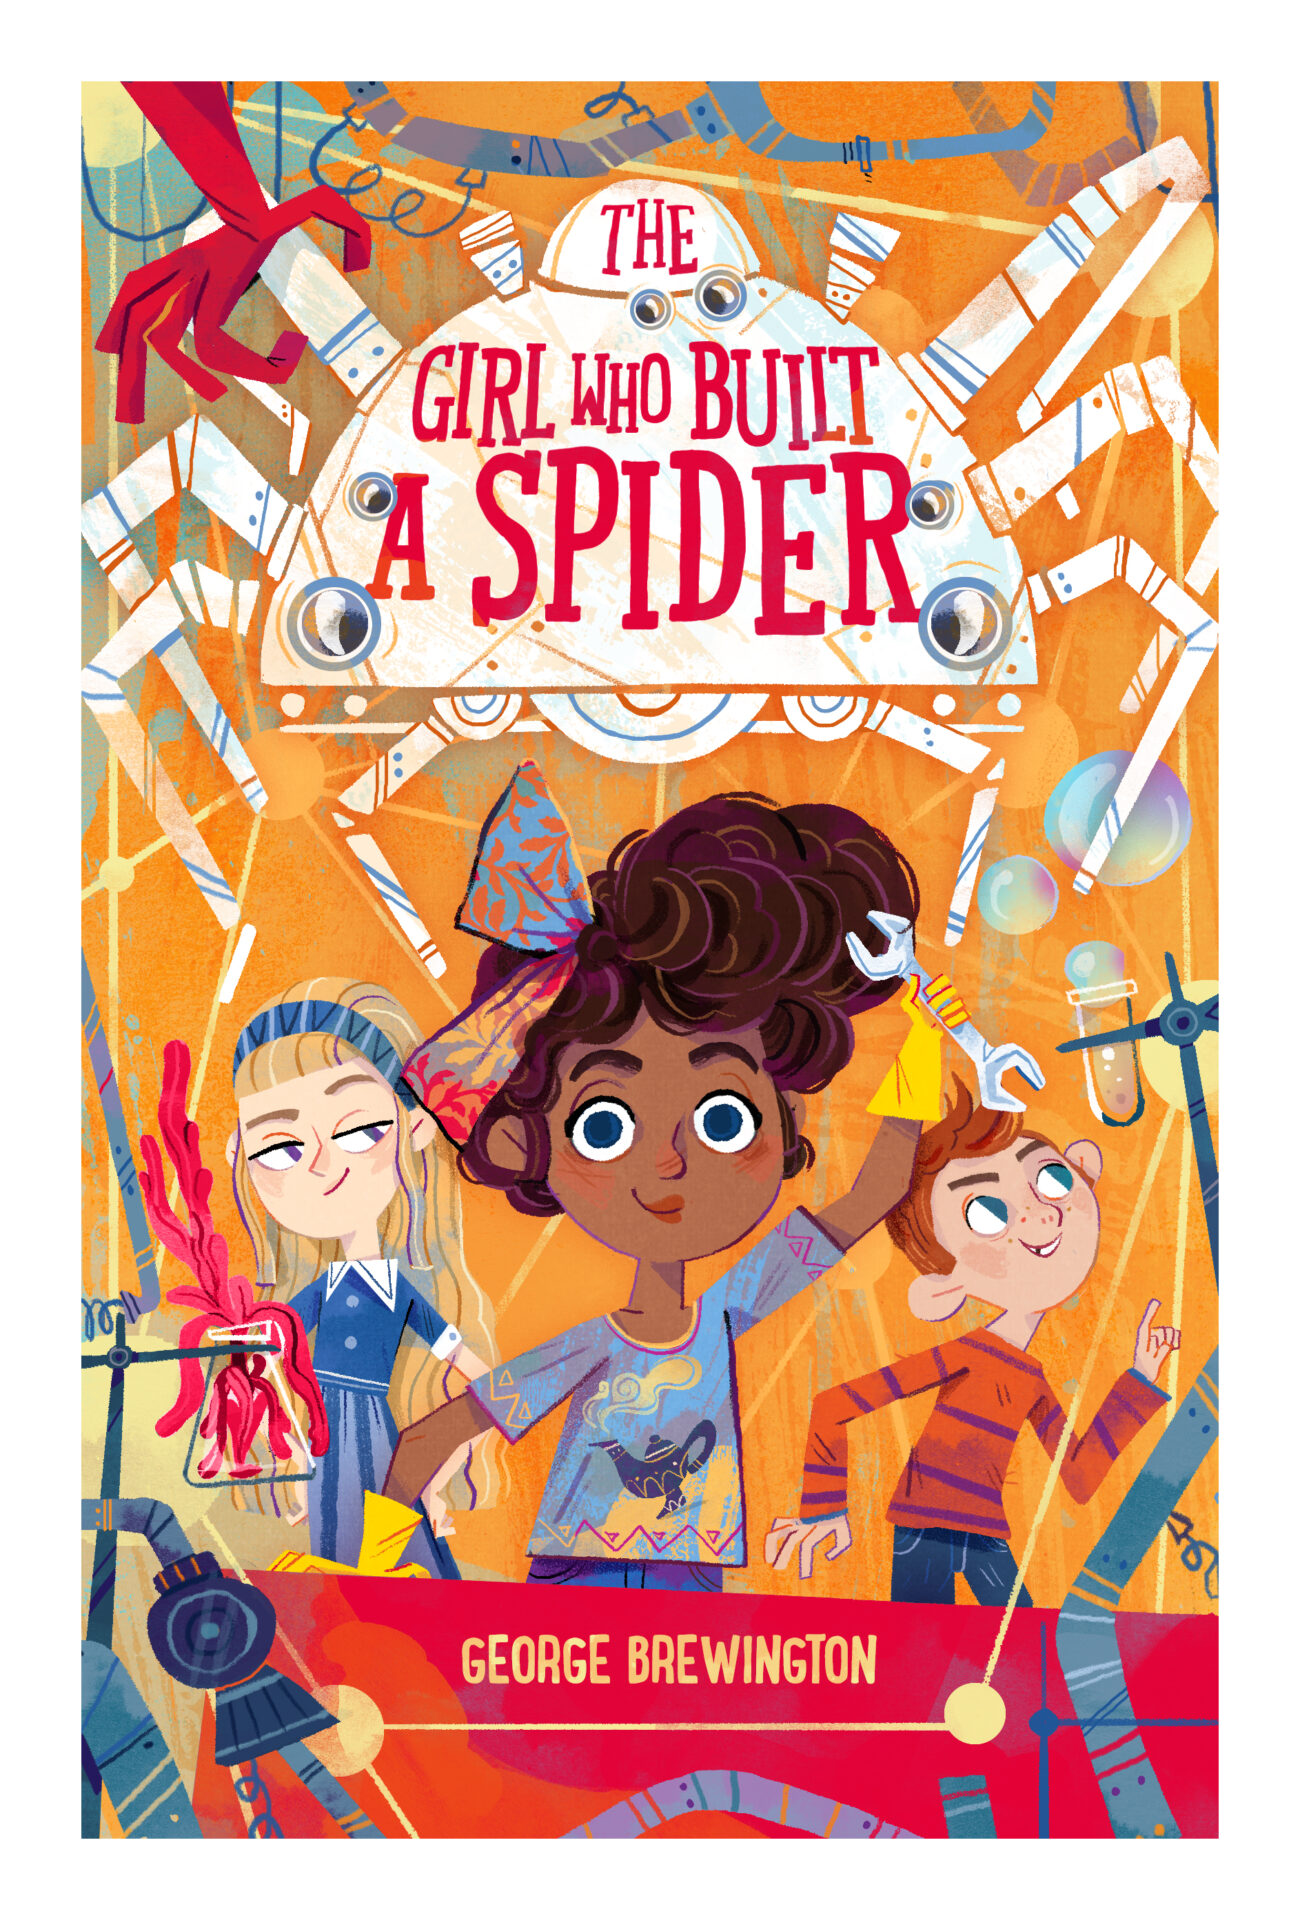 A fun-filled action-packed MG adventure featuring three young inventors and the wildest inventions ever!